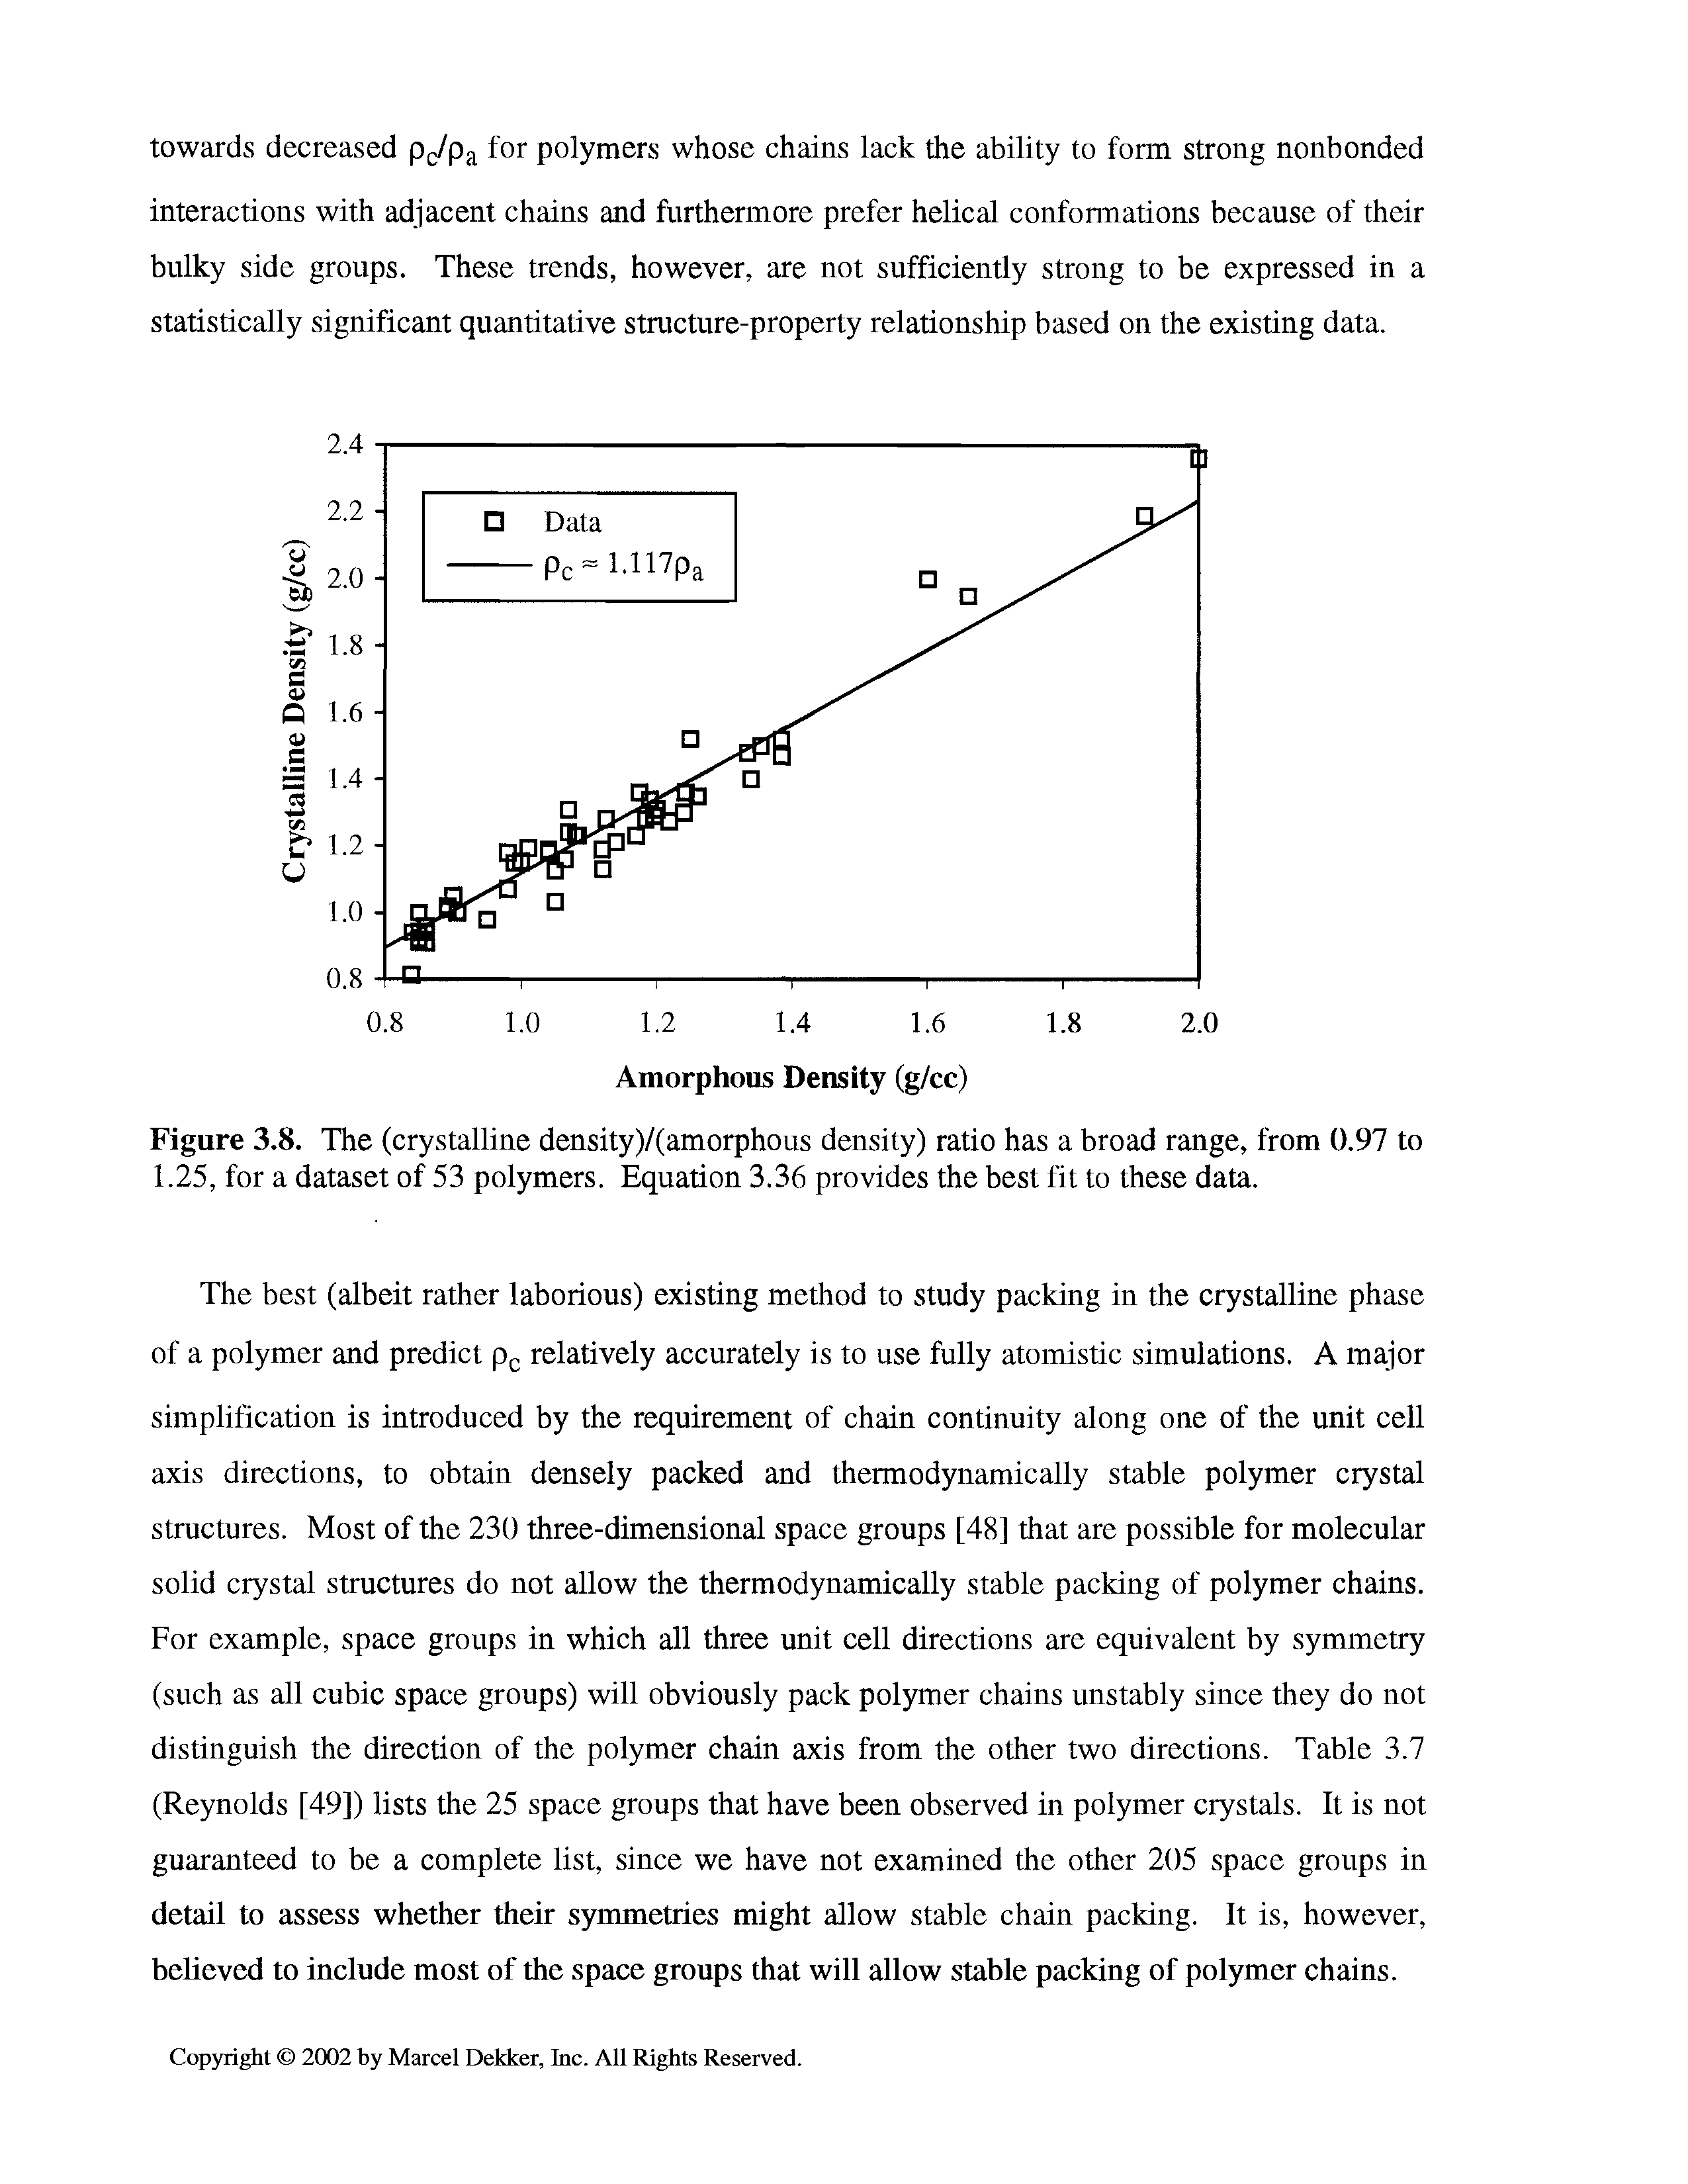 Figure 3.8. The (crystalline density)/(amorphous density) ratio has a broad range, from 0.97 to 1.25, for a dataset of 53 polymers. Equation 3.36 provides the best fit to these data.